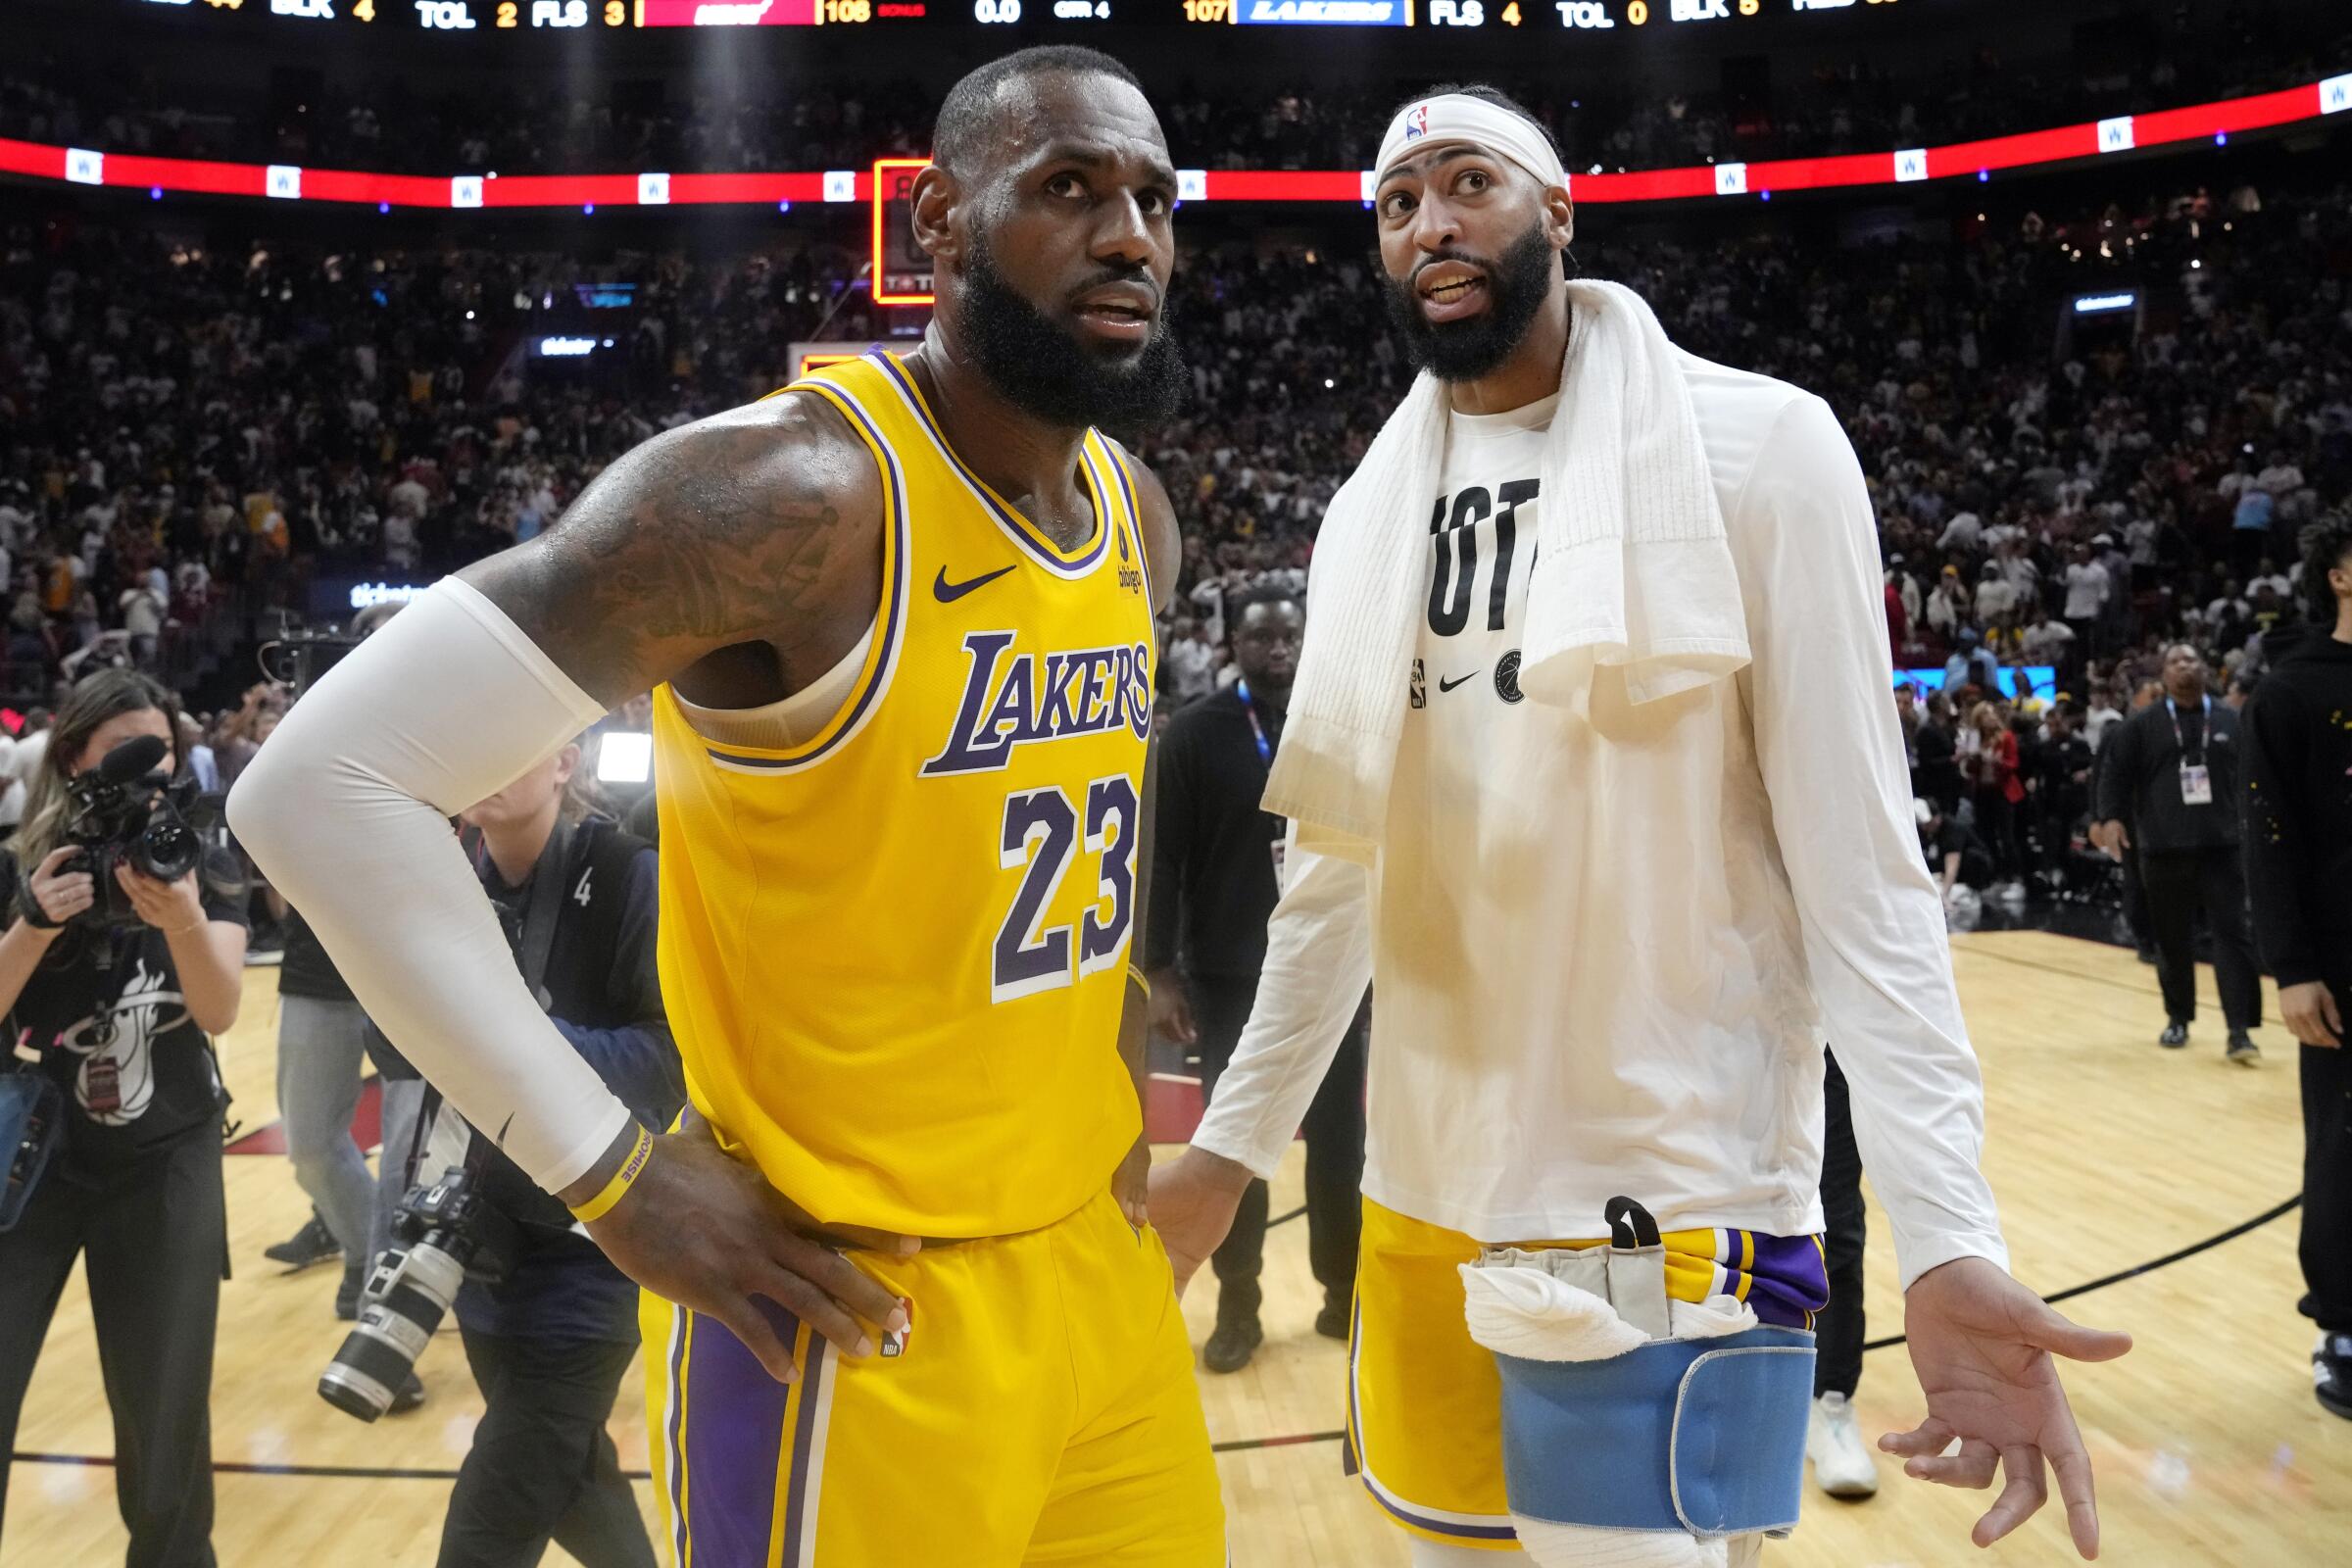 Lakers forward LeBron James, left, and forward Anthony Davis stand on the court after a 108-107 loss to the Miami Heat.